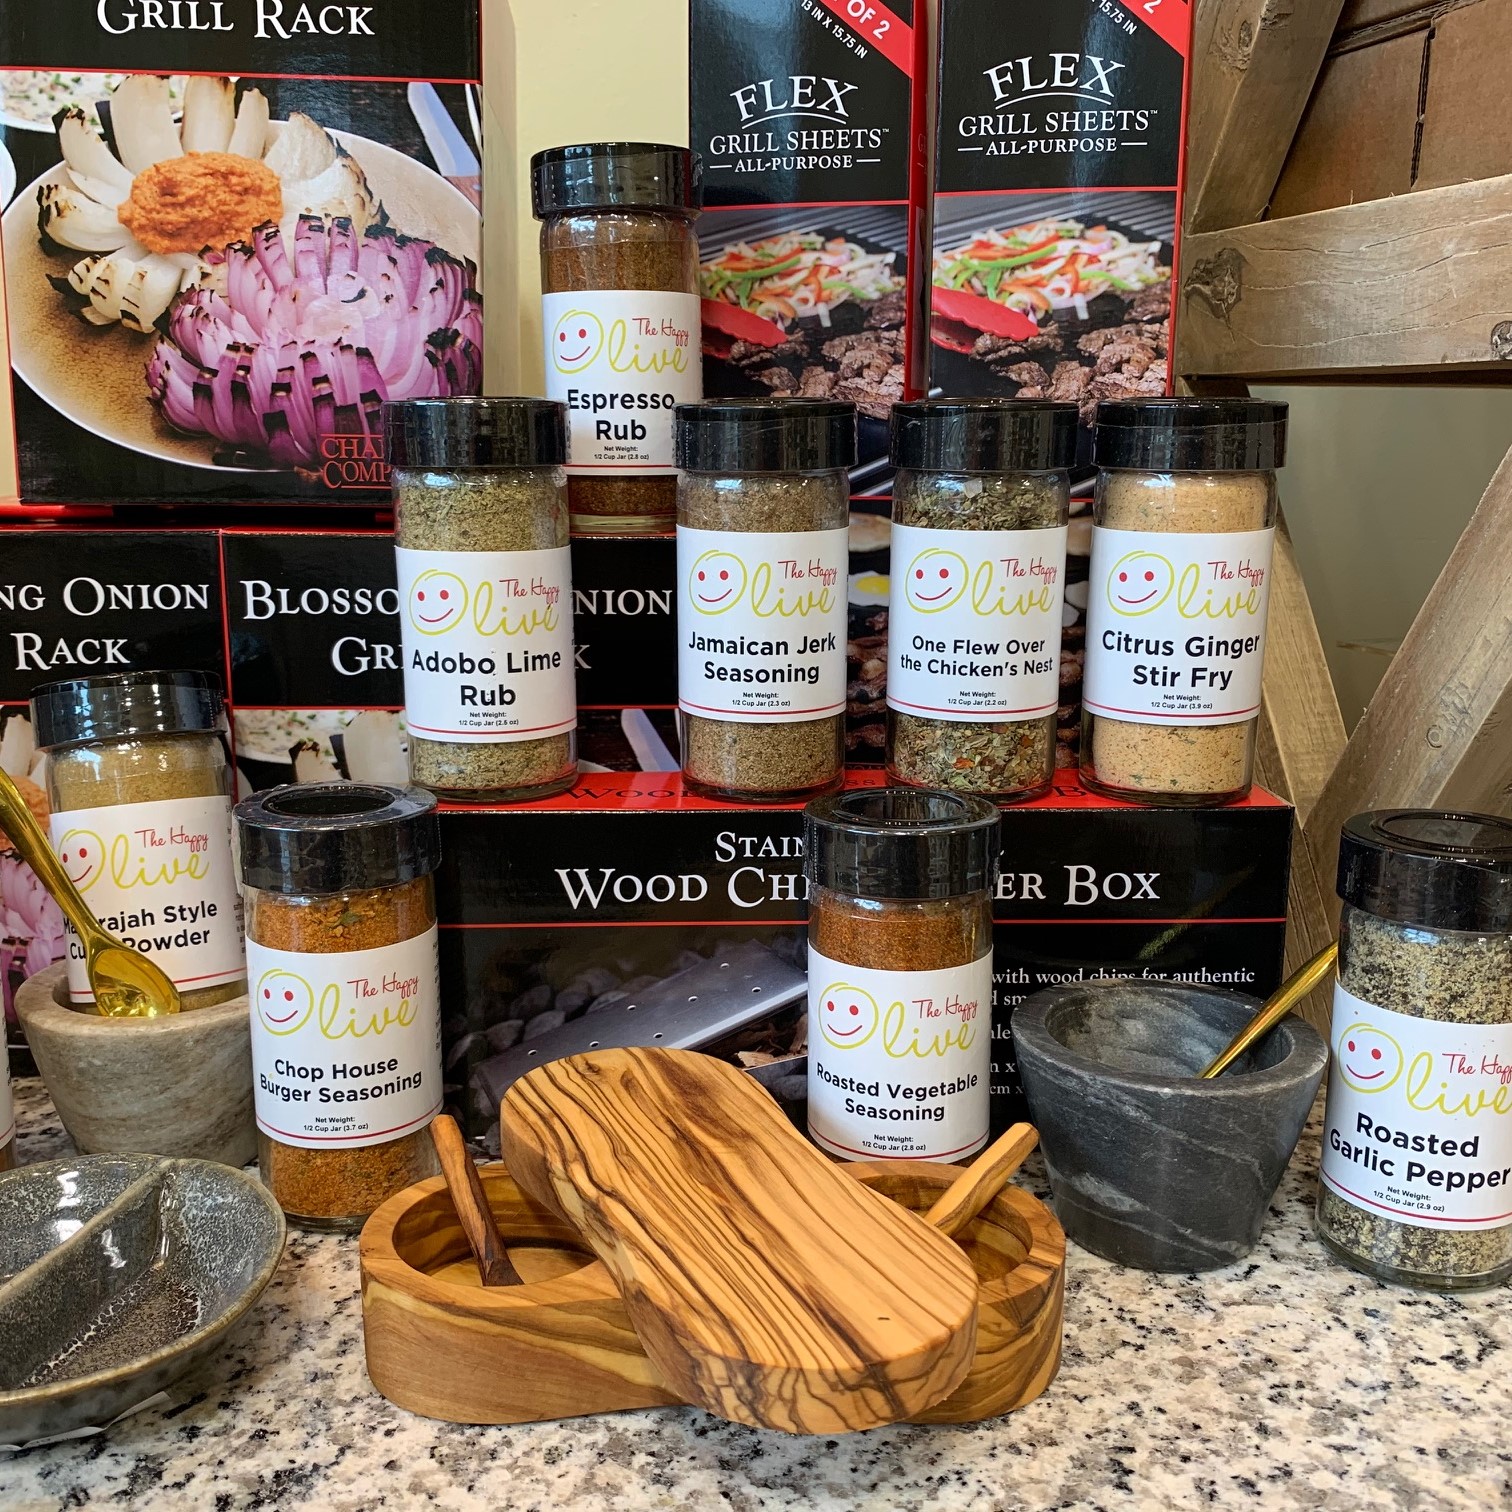 https://alabama-travel.s3.amazonaws.com/partners-uploads/photo/image/5ff206c026ed6d0007f93508/Mountain Brook Olive Co spices and grilling supplies.JPG